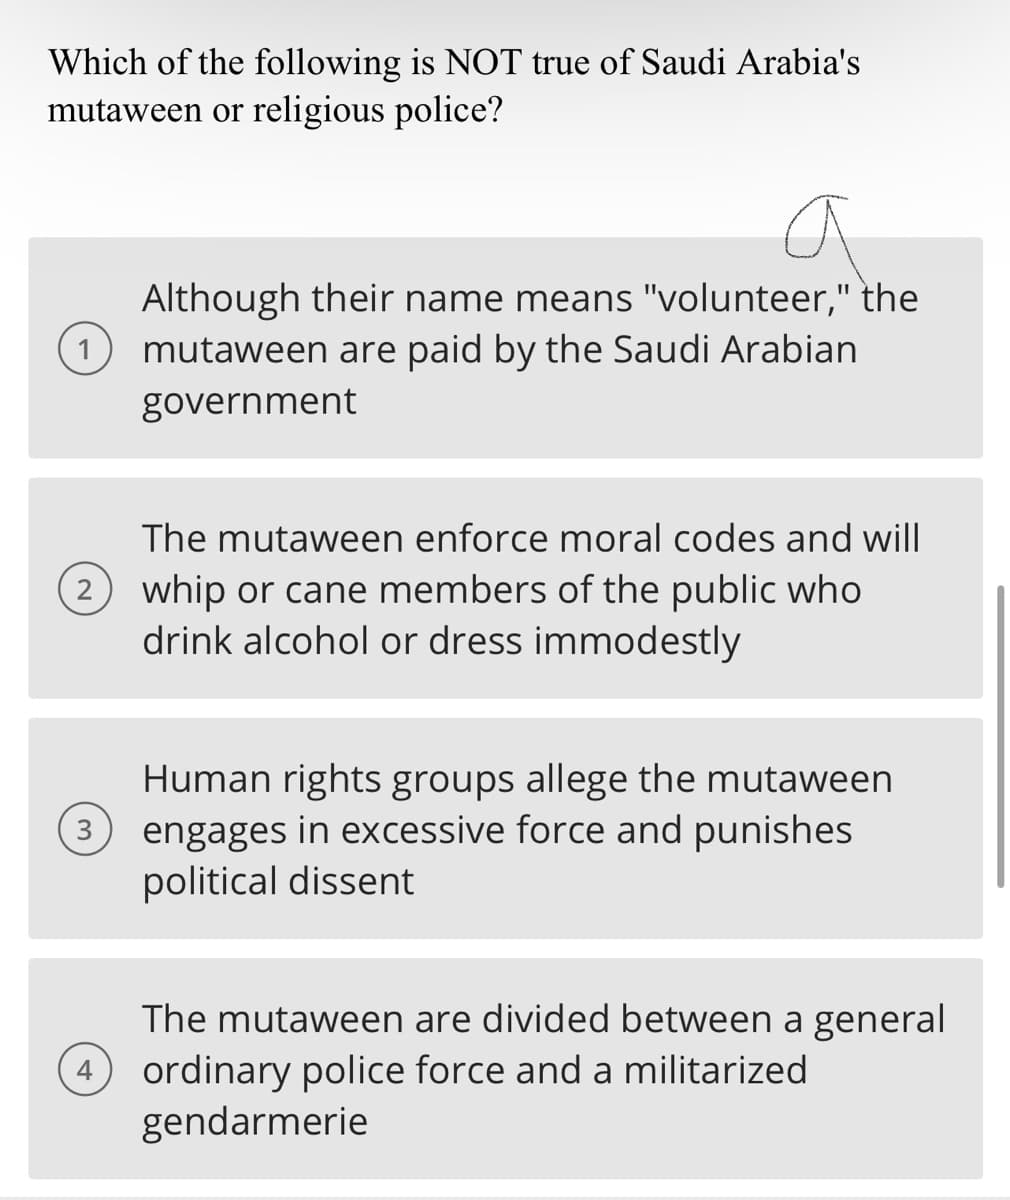 Which of the following is NOT true of Saudi Arabia's
mutaween or religious police?
1
a
Although their name means "volunteer," the
mutaween are paid by the Saudi Arabian
government
The mutaween enforce moral codes and will
2 whip or cane members of the public who
drink alcohol or dress immodestly
Human rights groups allege the mutaween
3 engages in excessive force and punishes
political dissent
The mutaween are divided between a general
4 ordinary police force and a militarized
gendarmerie